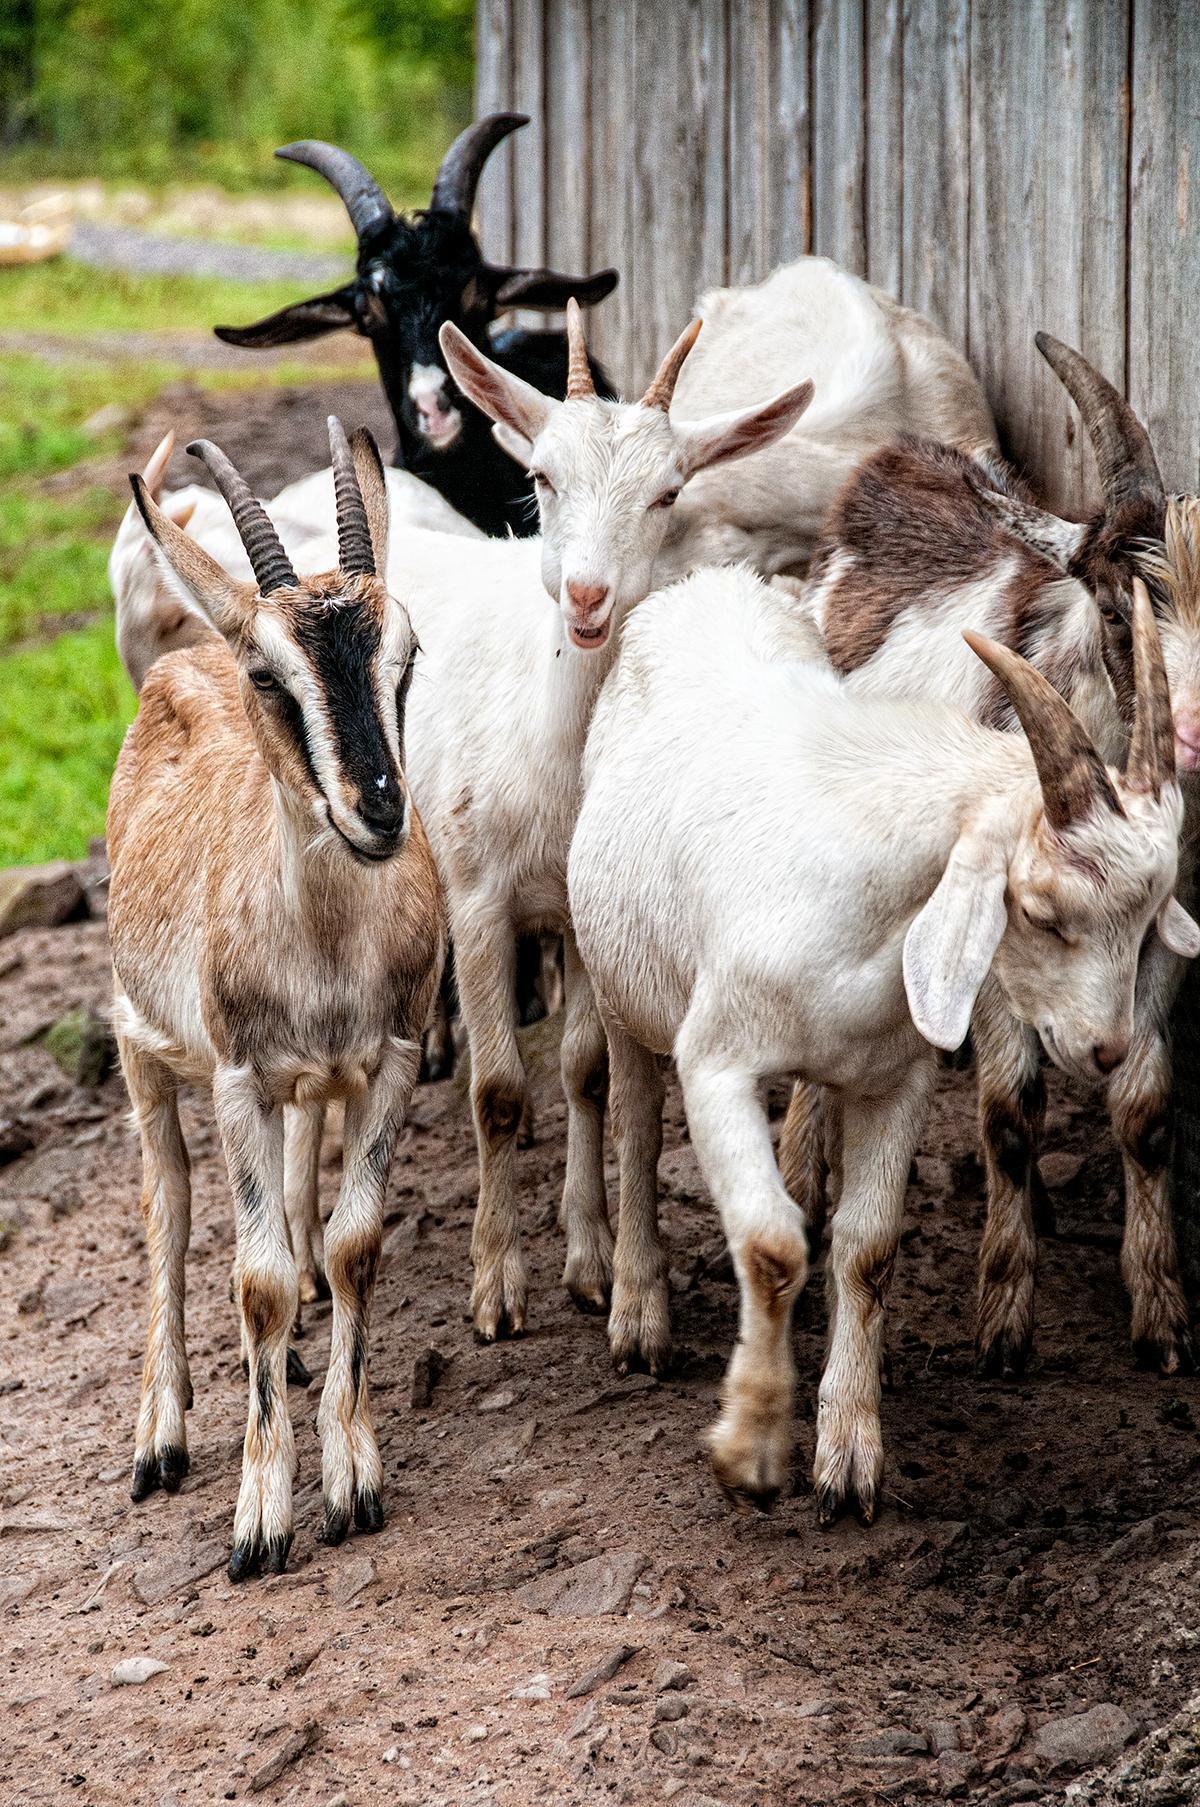 Here at CheeseWeb, we love goats!